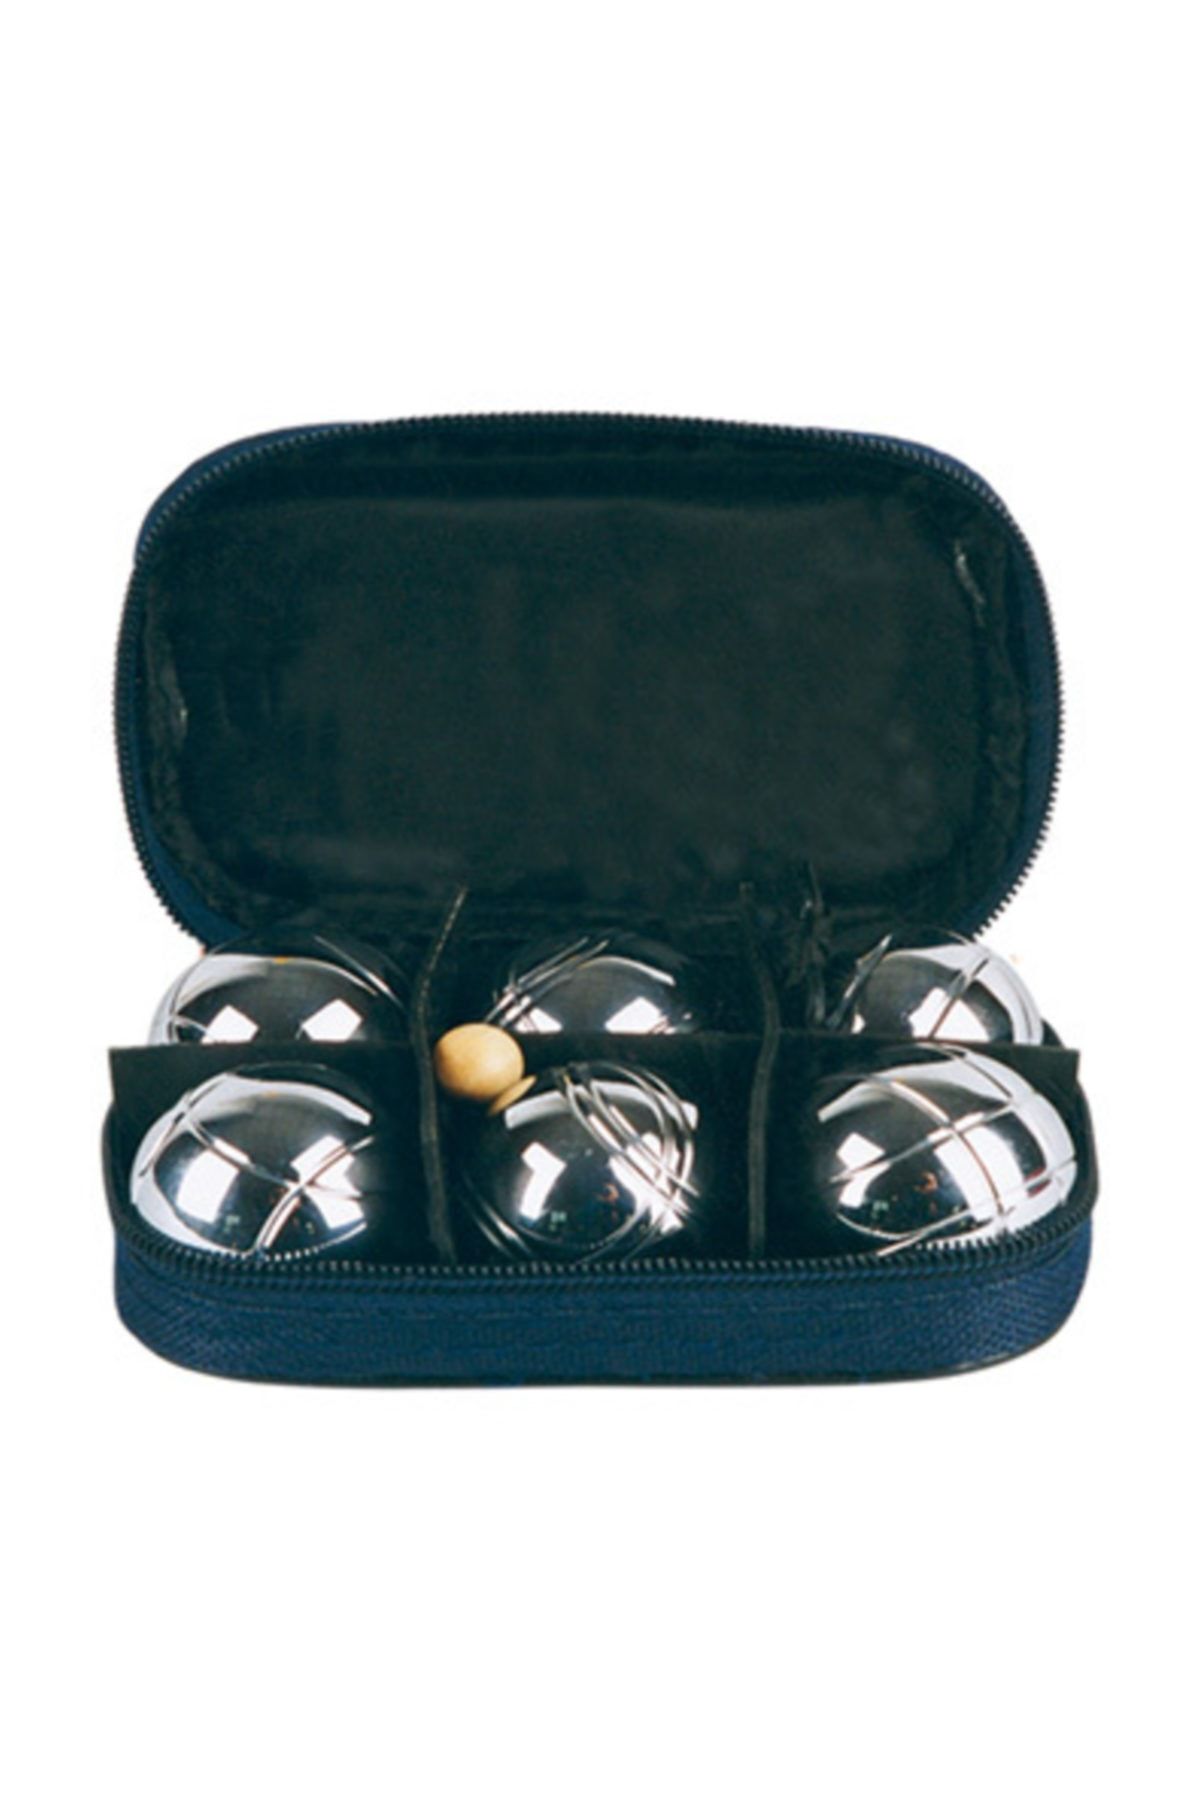 Busso Bs54 Bocce Set